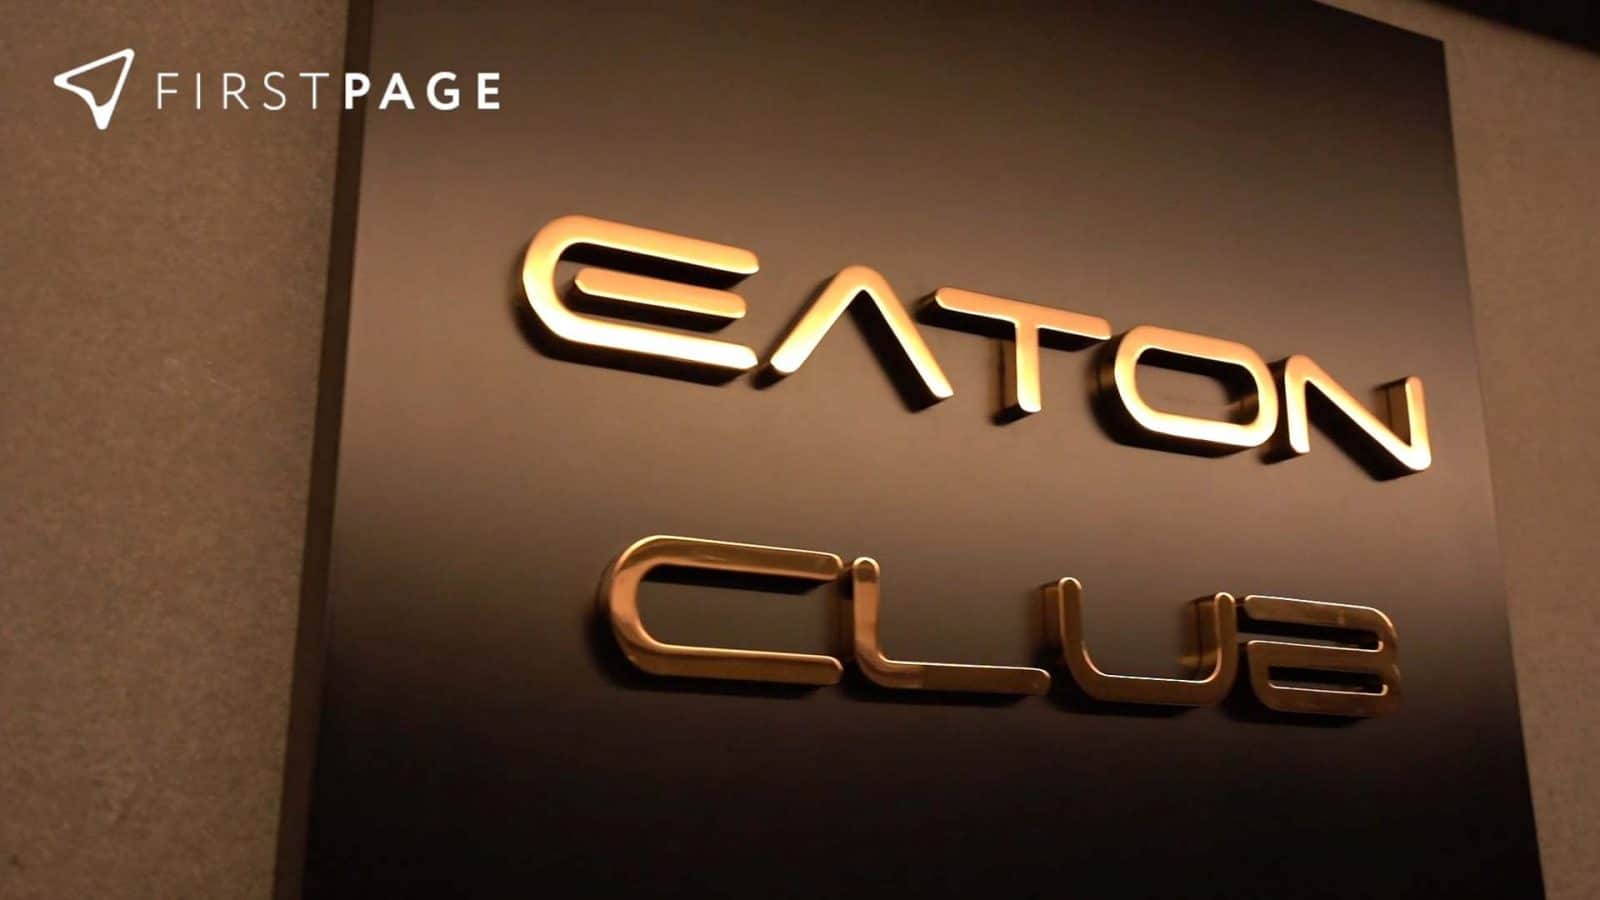 Eaton Club’s First Page Experience